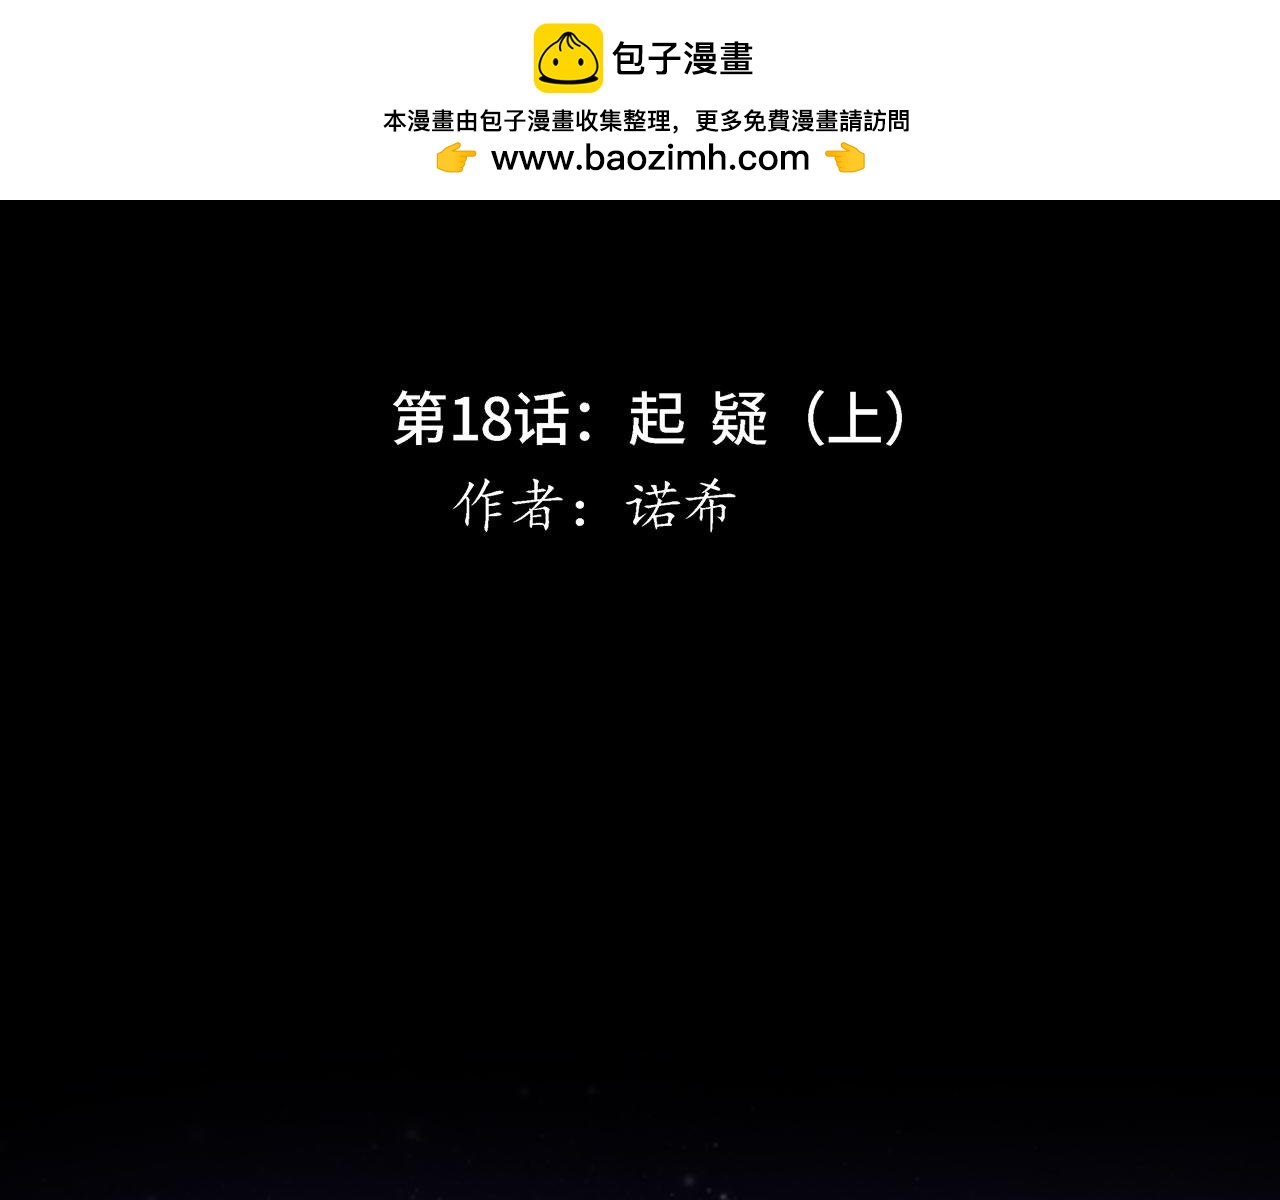 Only You - 第18話 起疑（上）(1/4) - 2